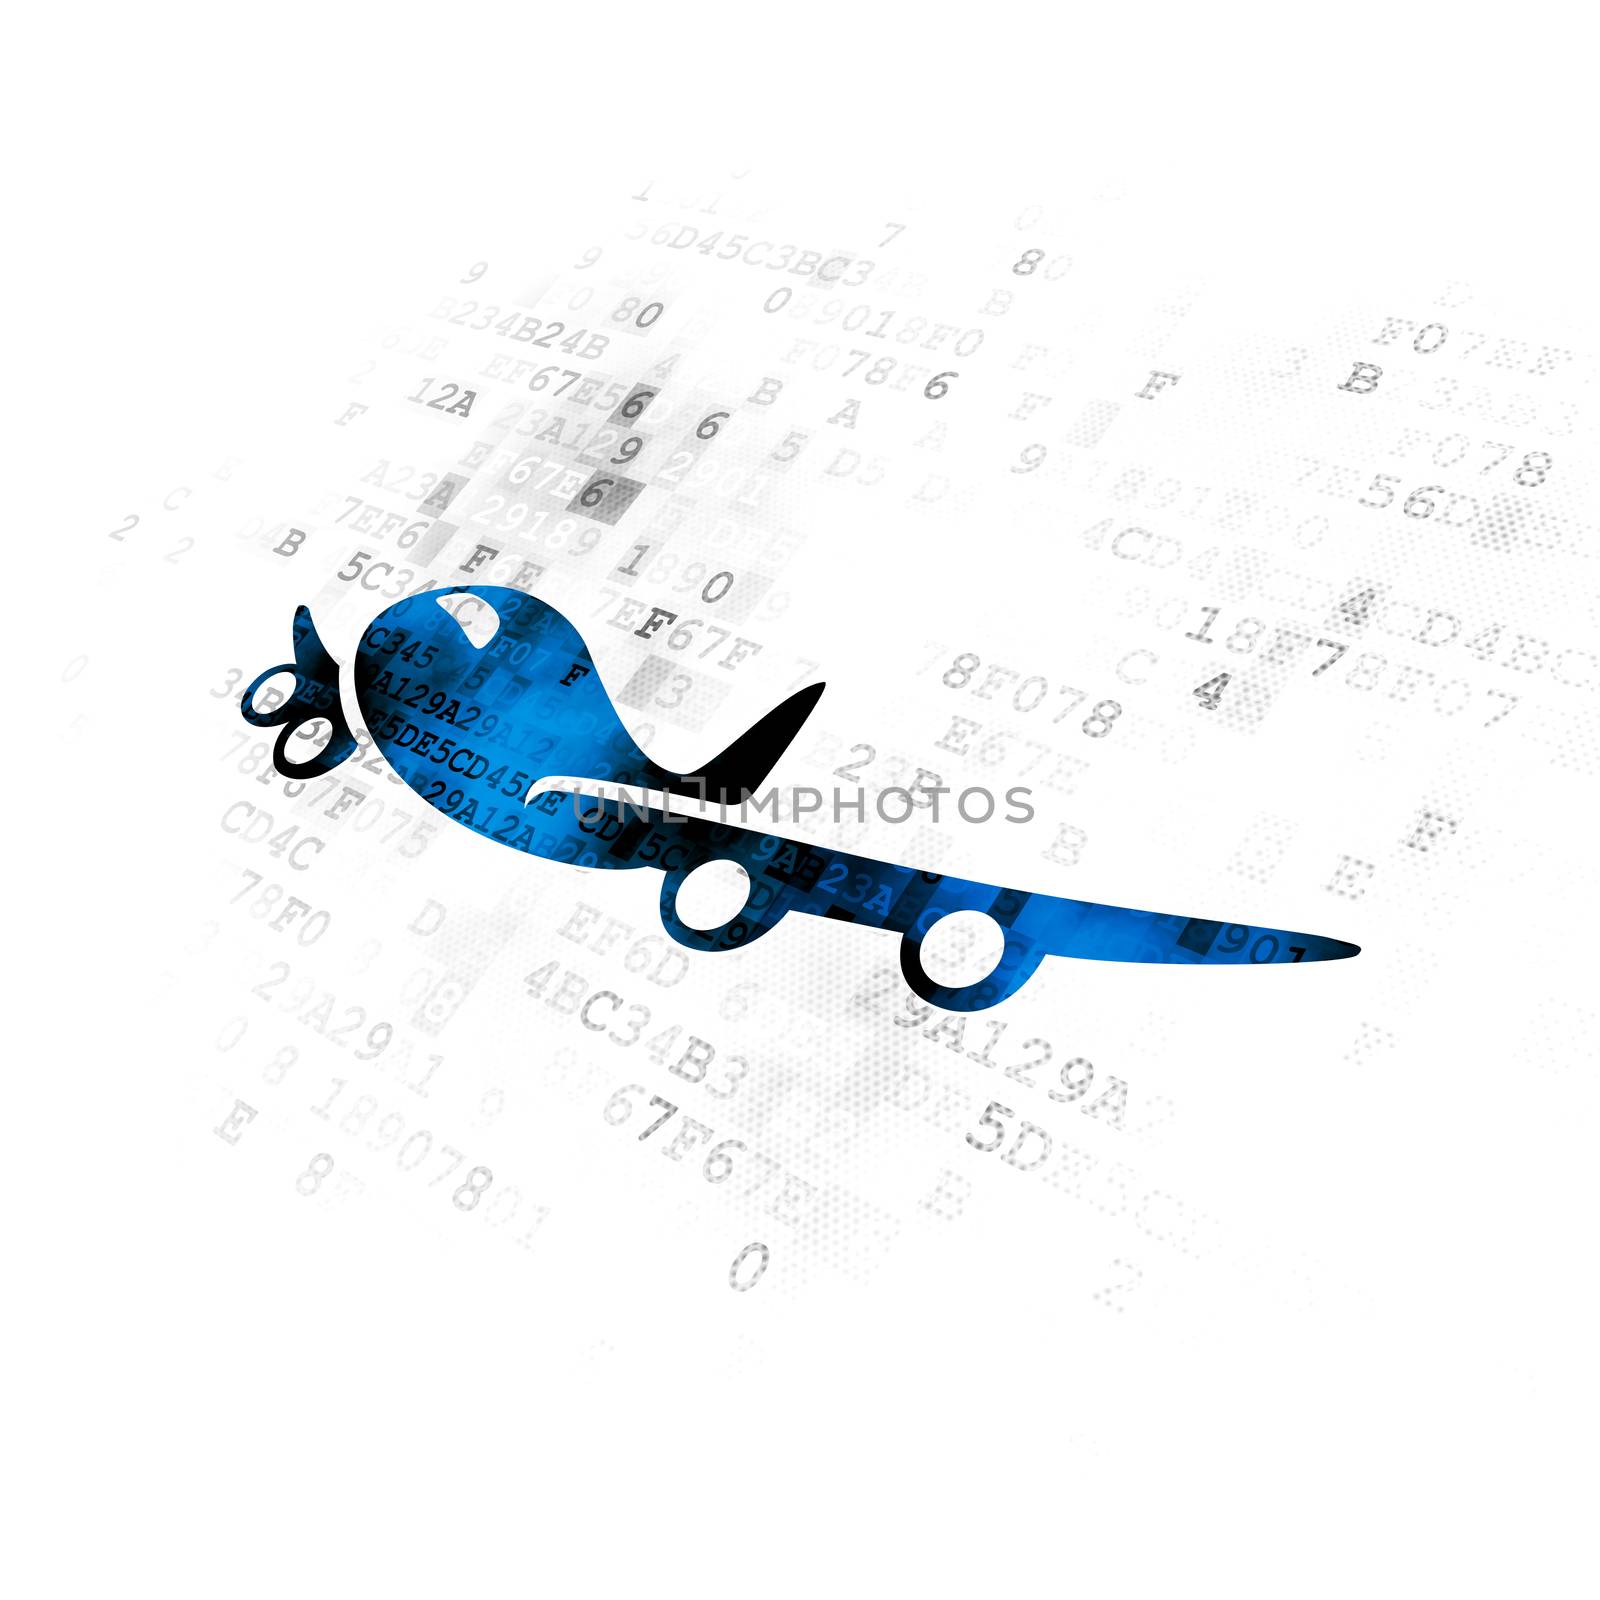 Tourism concept: Pixelated blue Airplane icon on Digital background